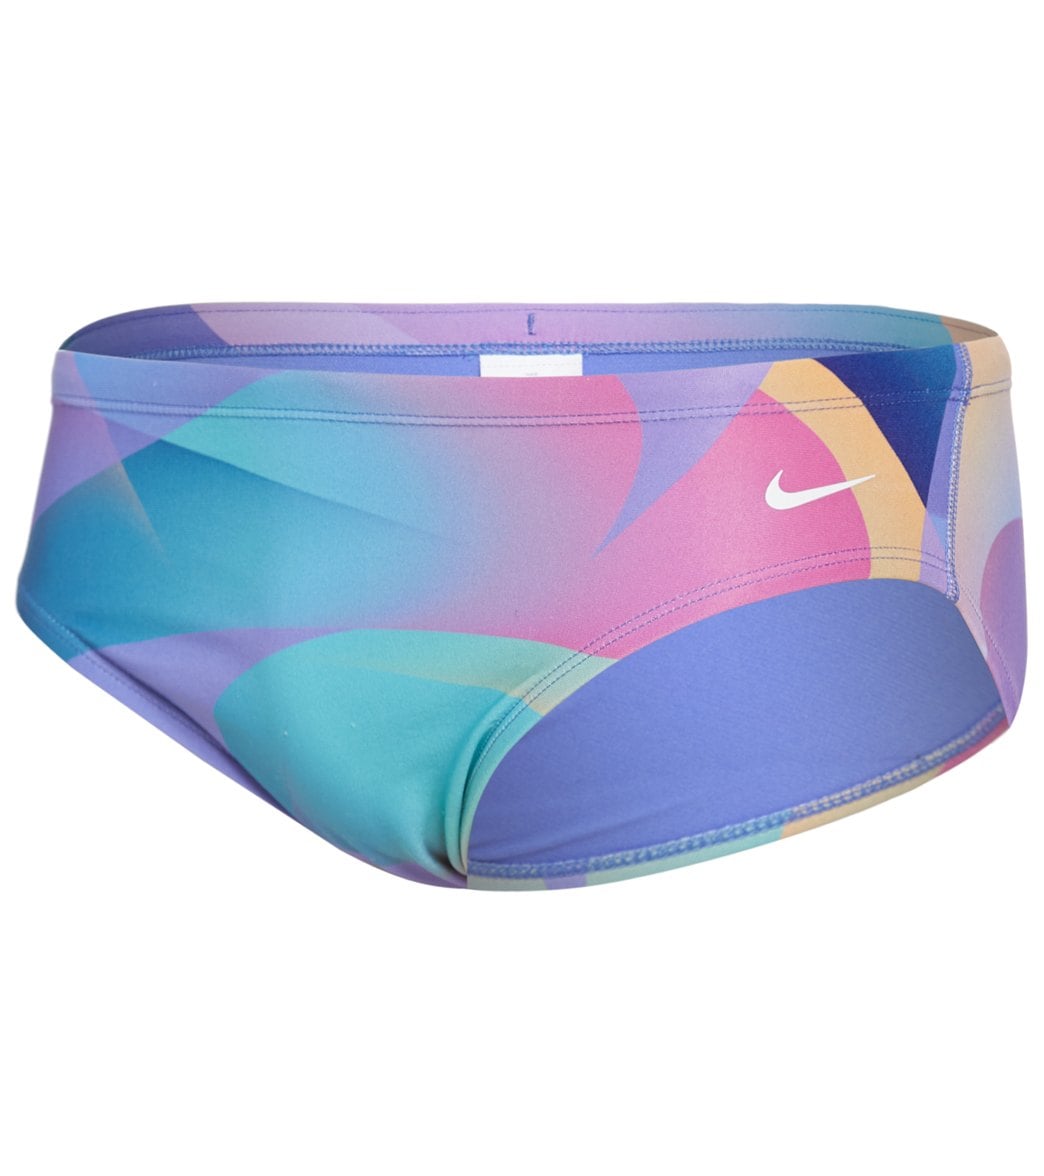 Nike Men's Hydrastrong Spectrum Brief Swimsuit - Sapphire 34 Polyester - Swimoutlet.com